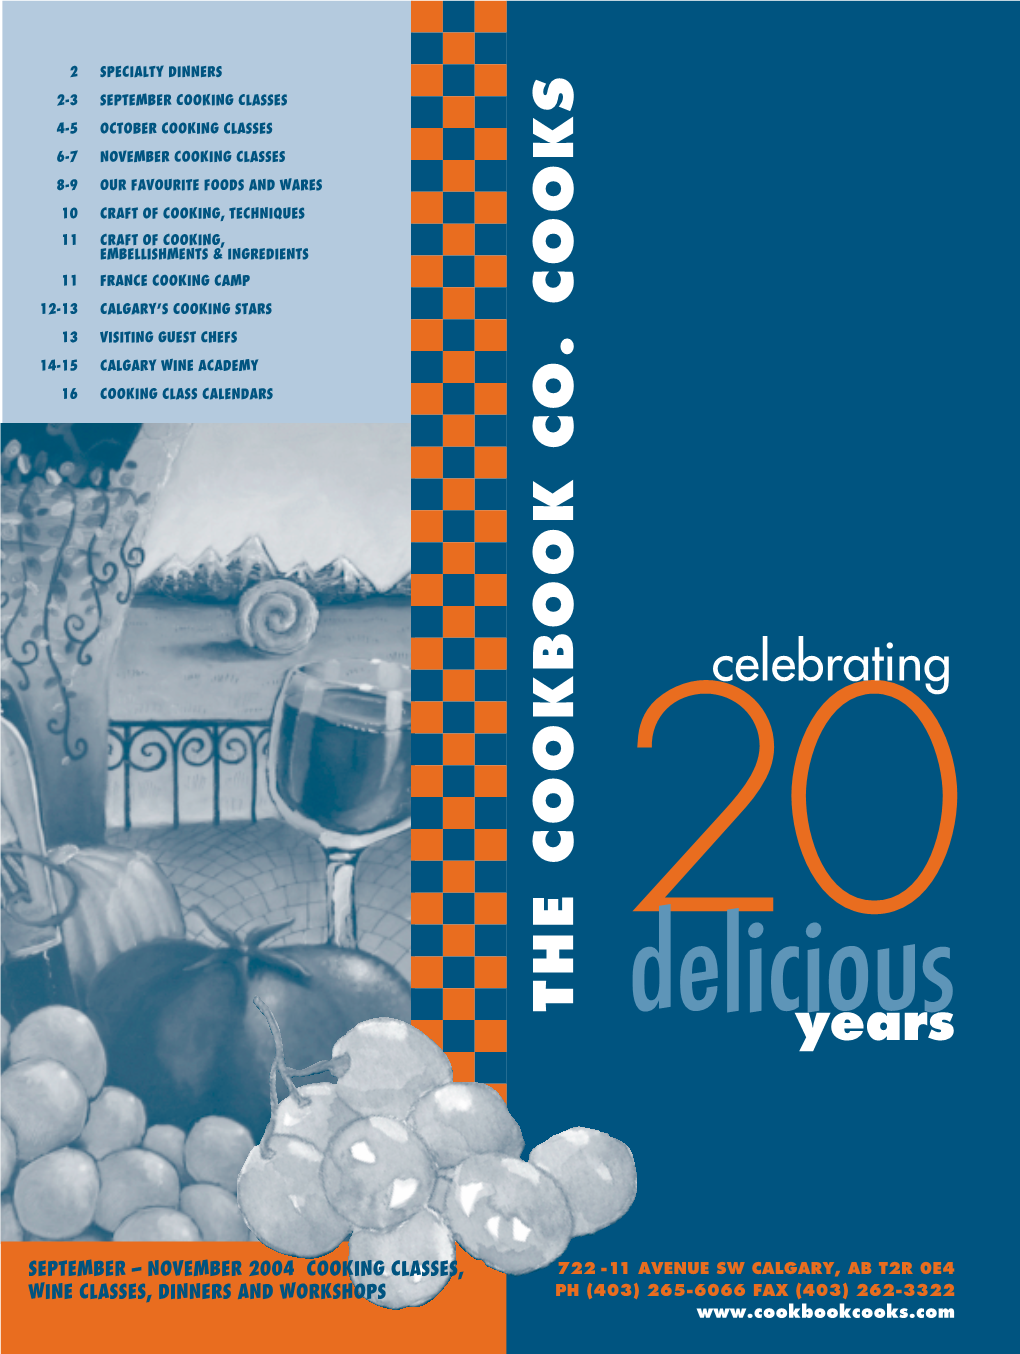 THE COOKBOOK CO. COOKS Deliciousyears